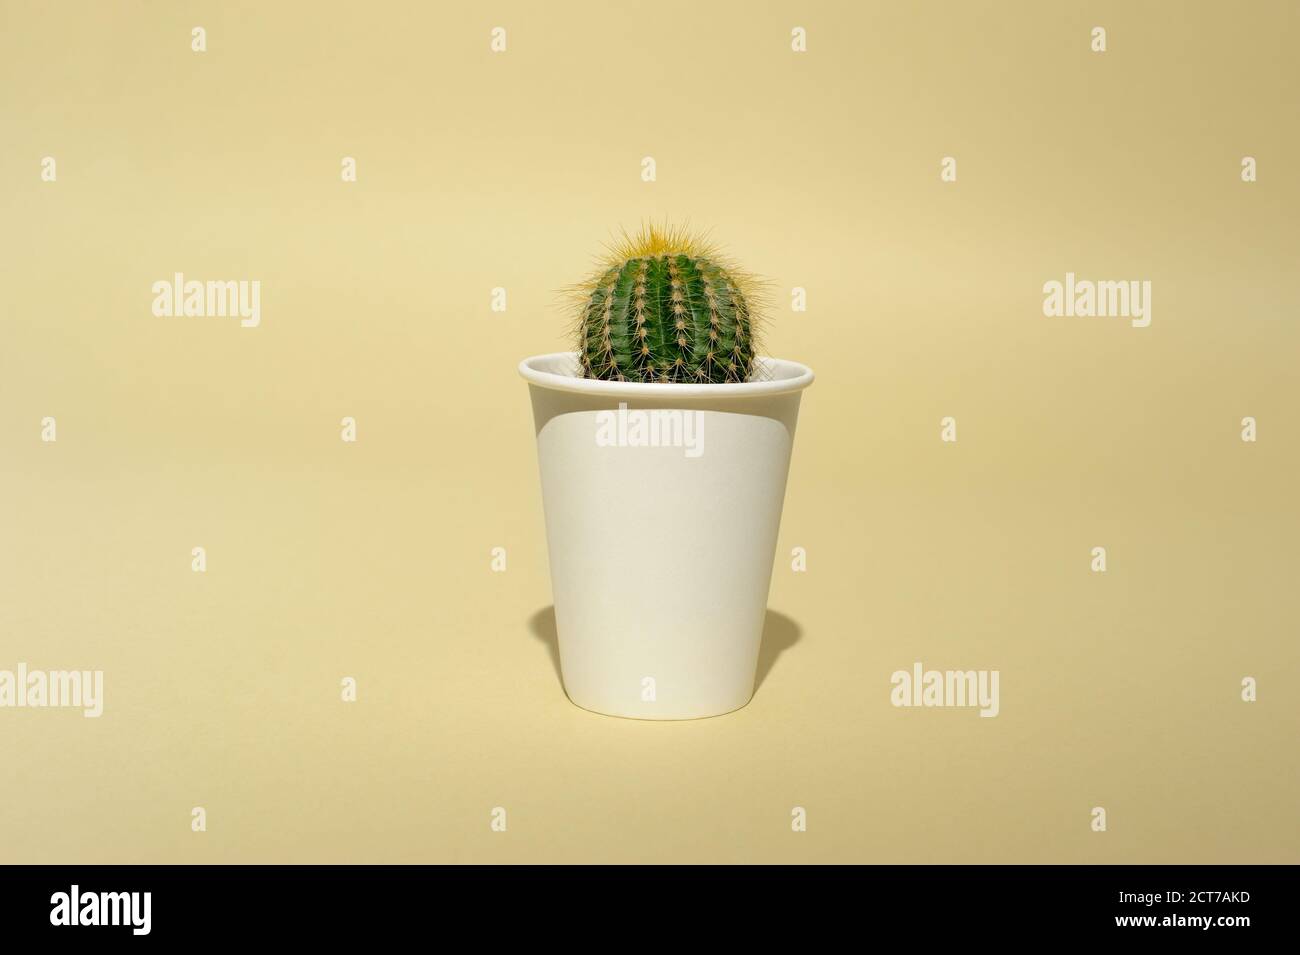 Cactus plant with thorns growing in a white paper pot.  Home indoor plant. Creative minimal concept. Stock Photo